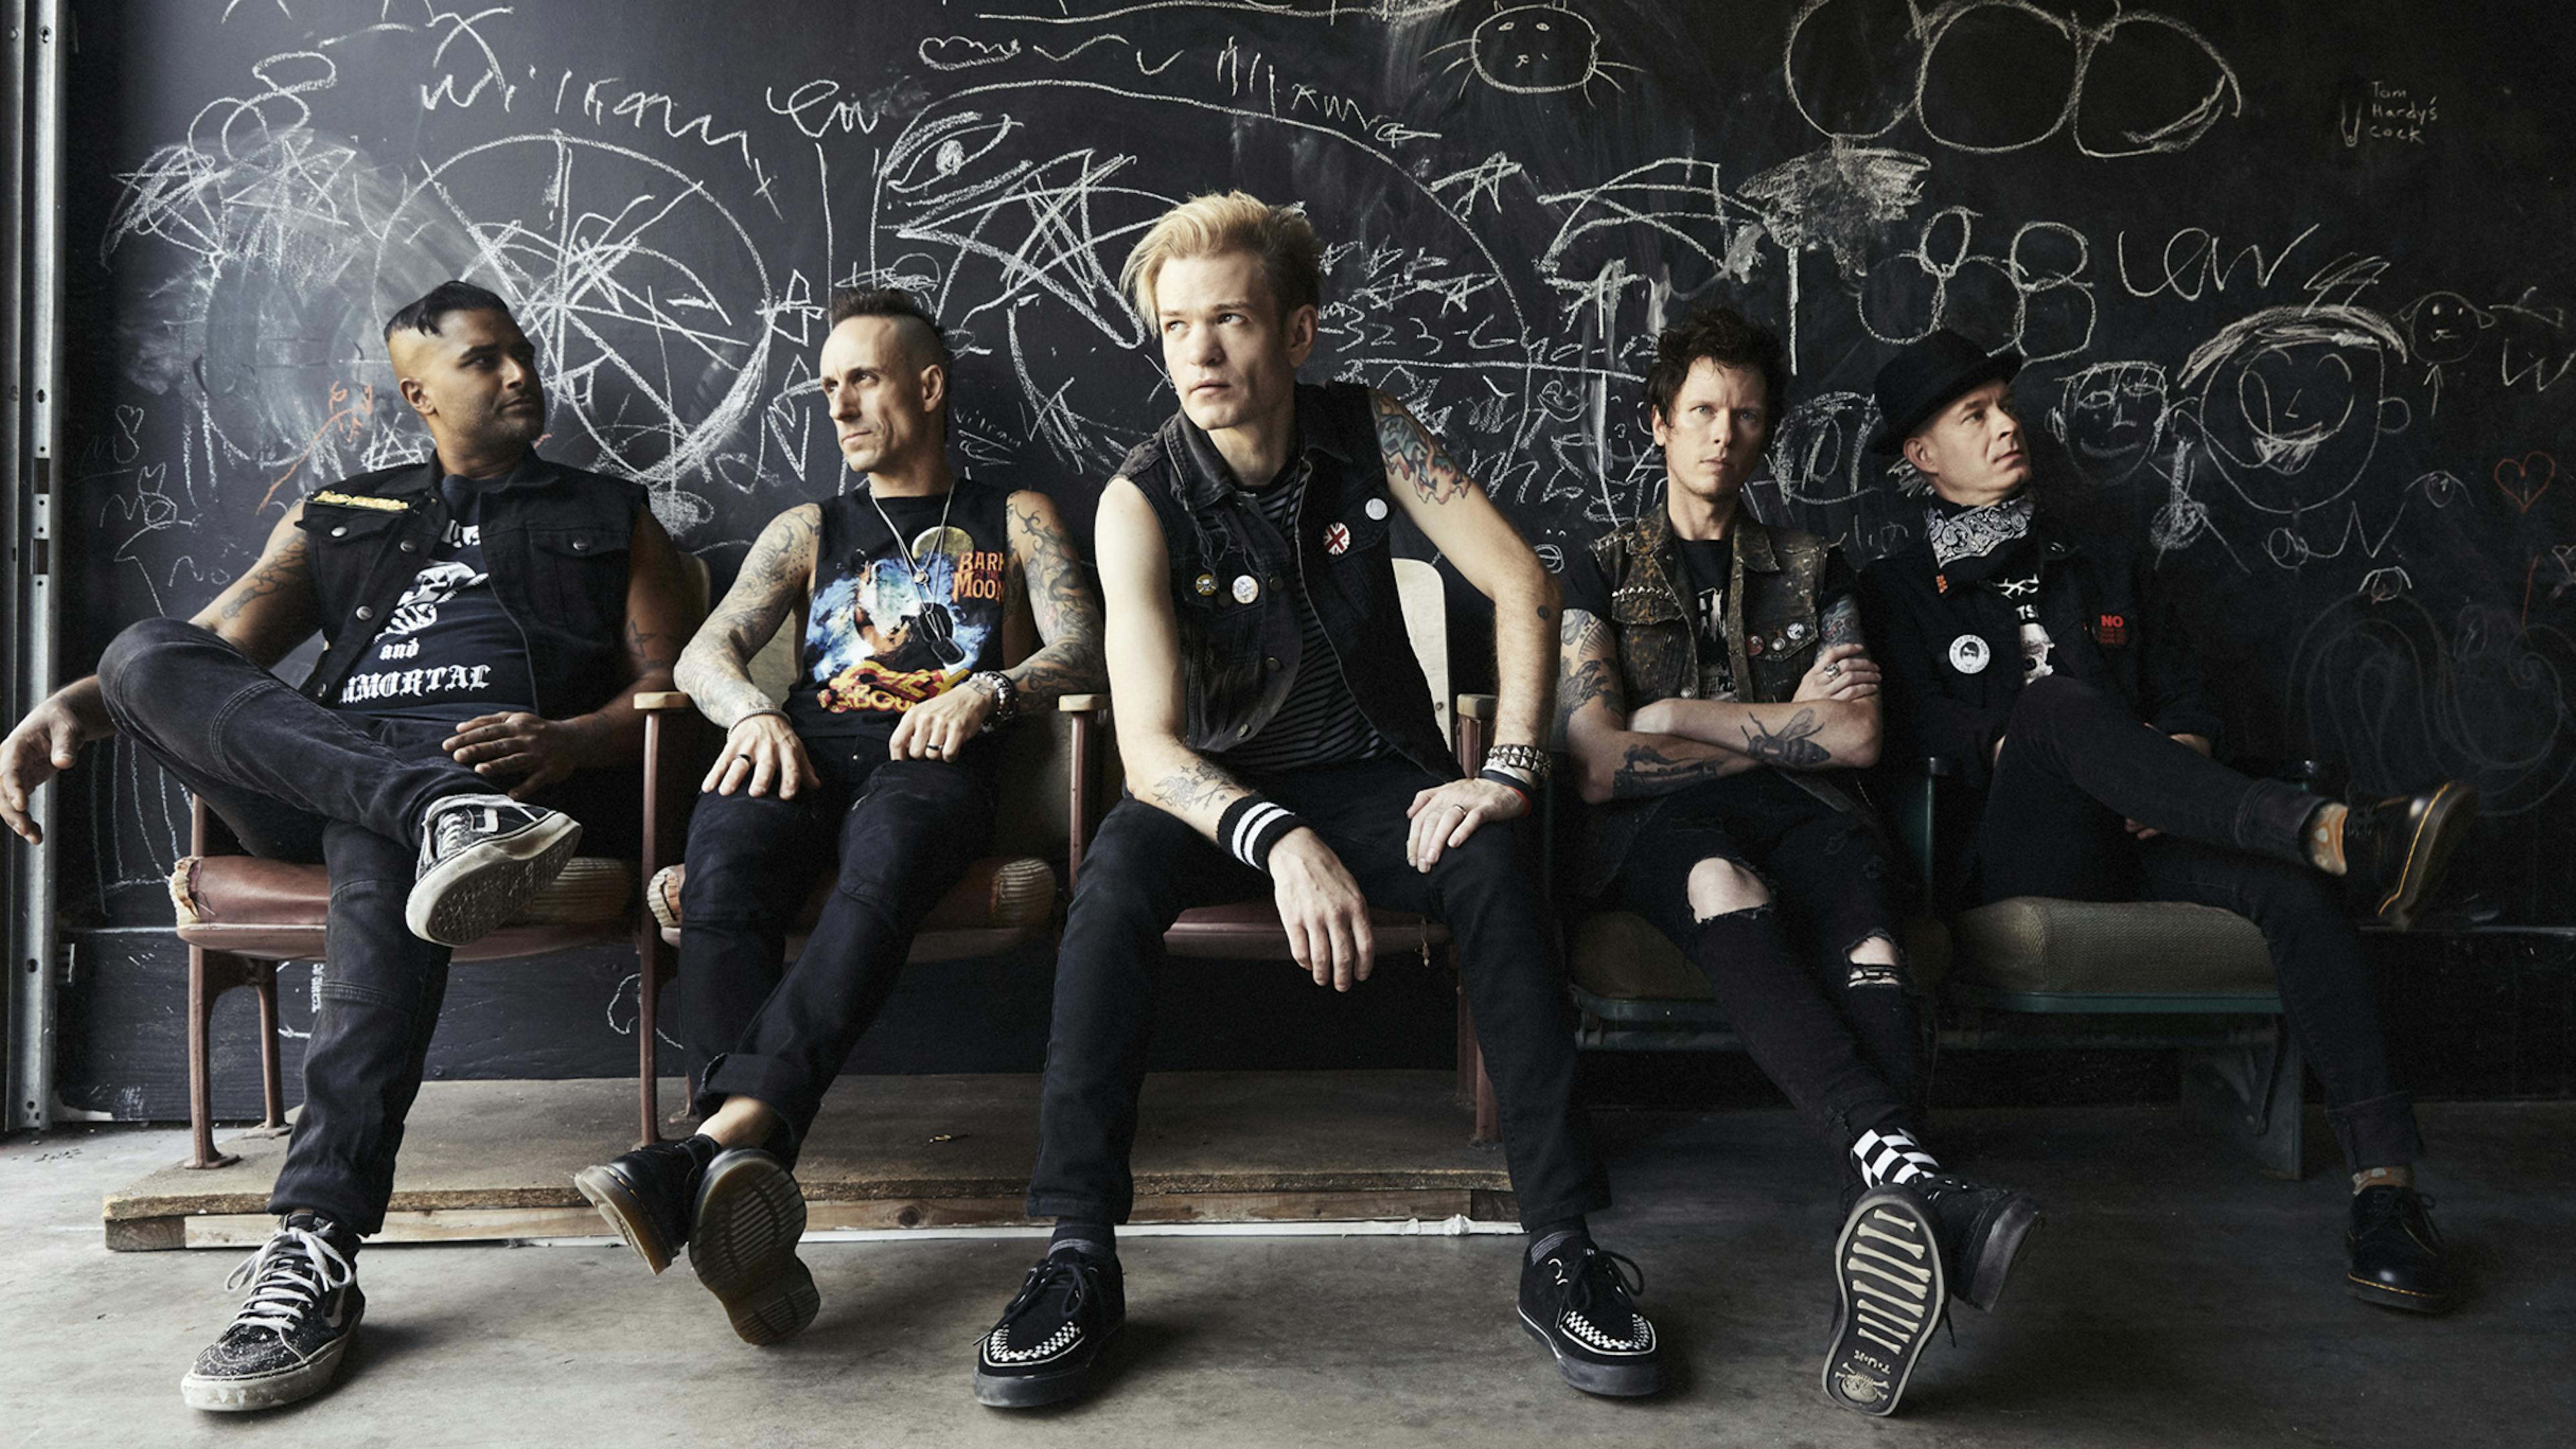 Deryck Whibley: “Heaven :x: Hell is the best Sum 41 record we’ve made”